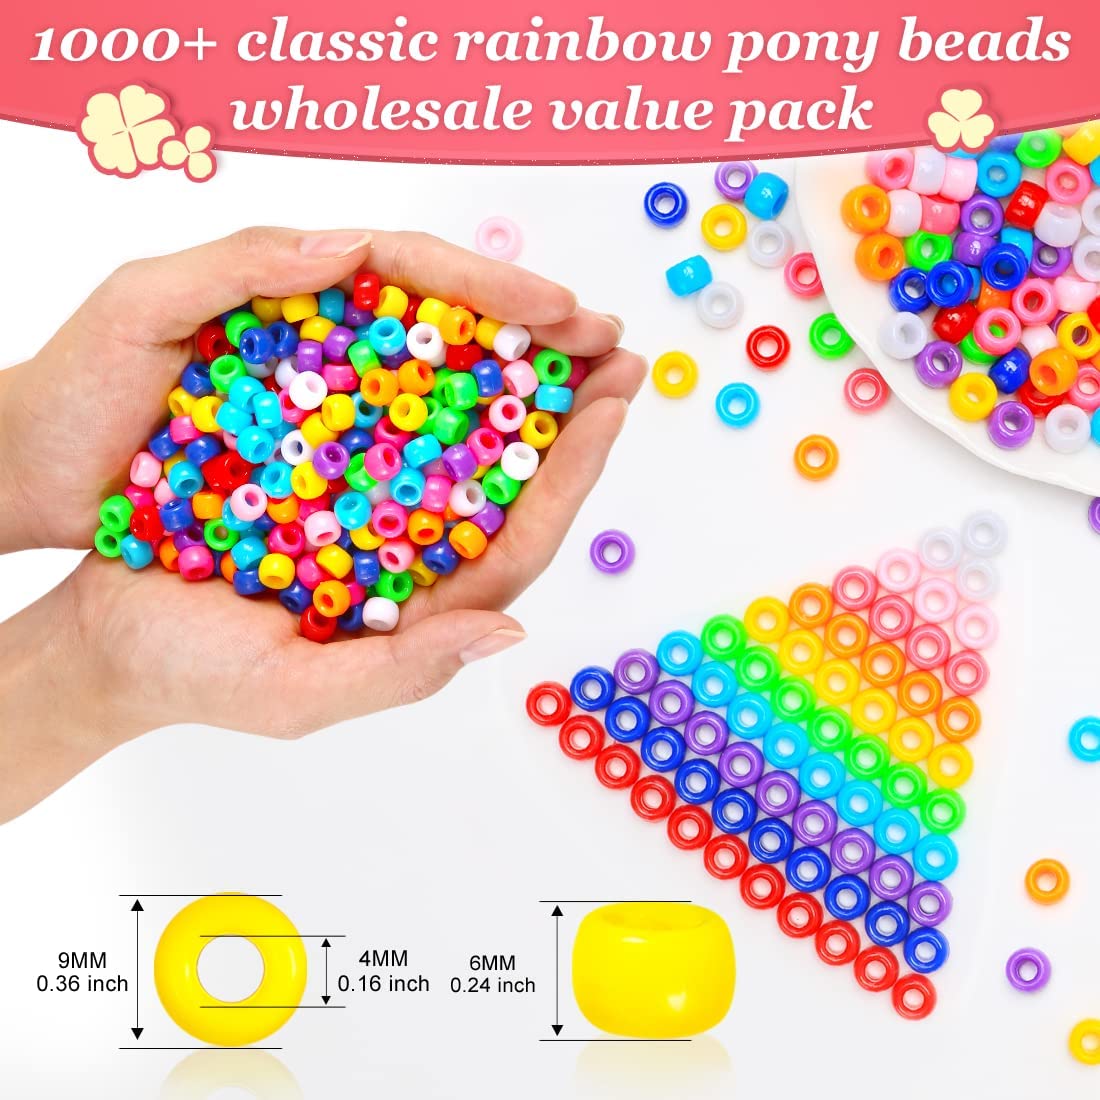 Pony Beads, Multi-Colored Bracelet Beads, Beads for Hair Braids, Beads for Crafts, Plastic Beads, Hair Beads for Braids (Small Pack, Earth Tone)